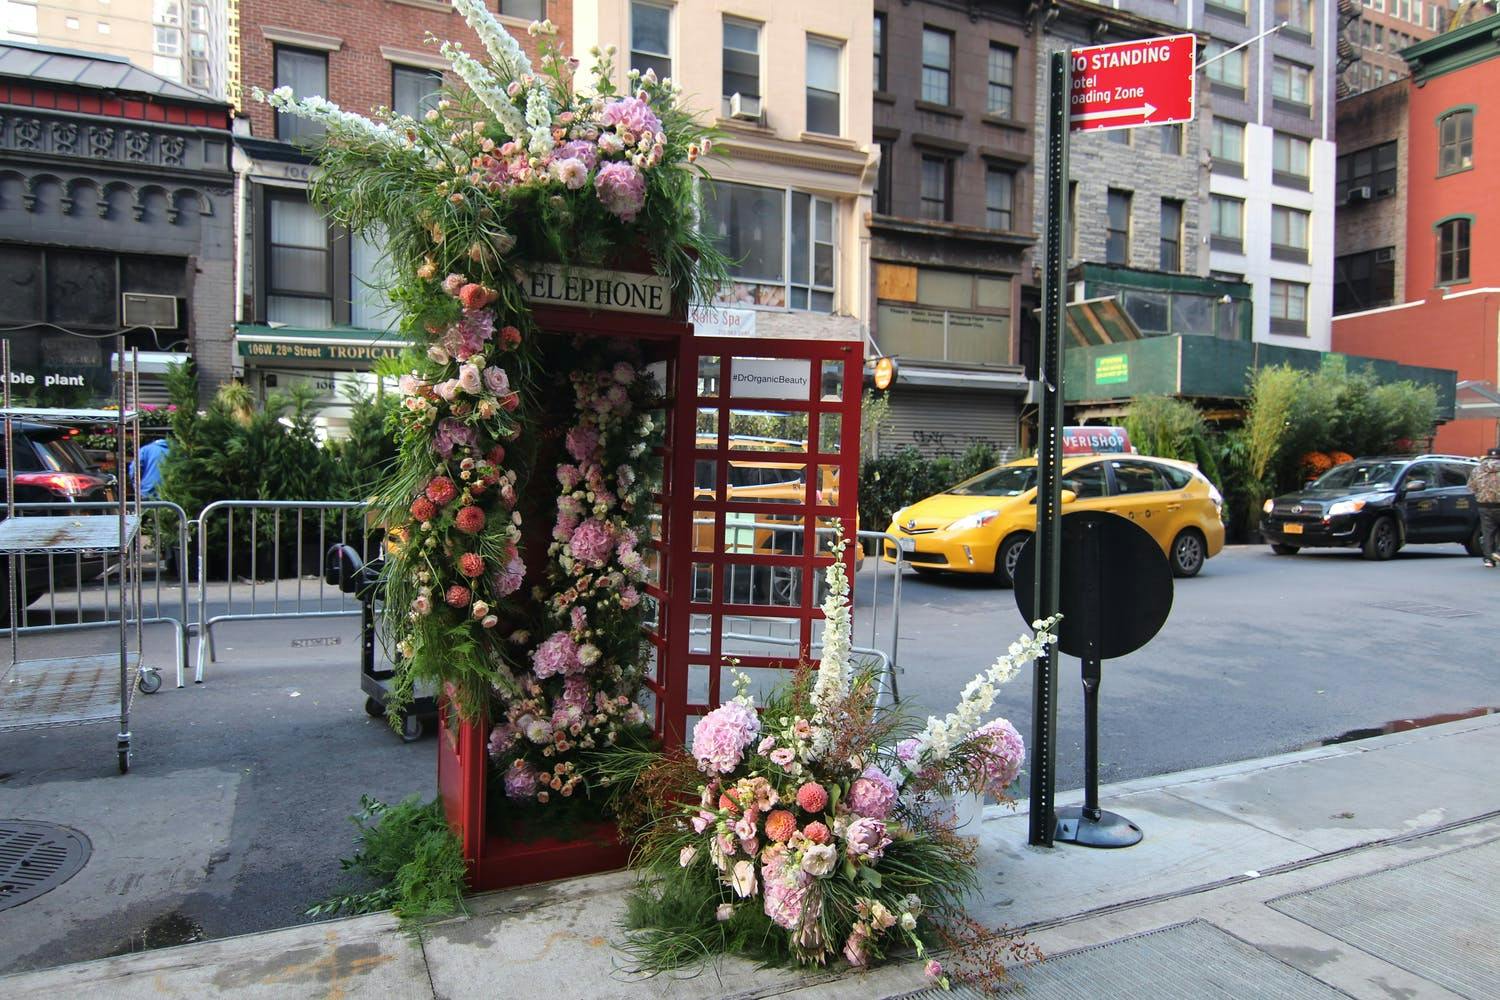 Vintage Bristish telephone booth overflowing with flowers for launch event | PartySlate